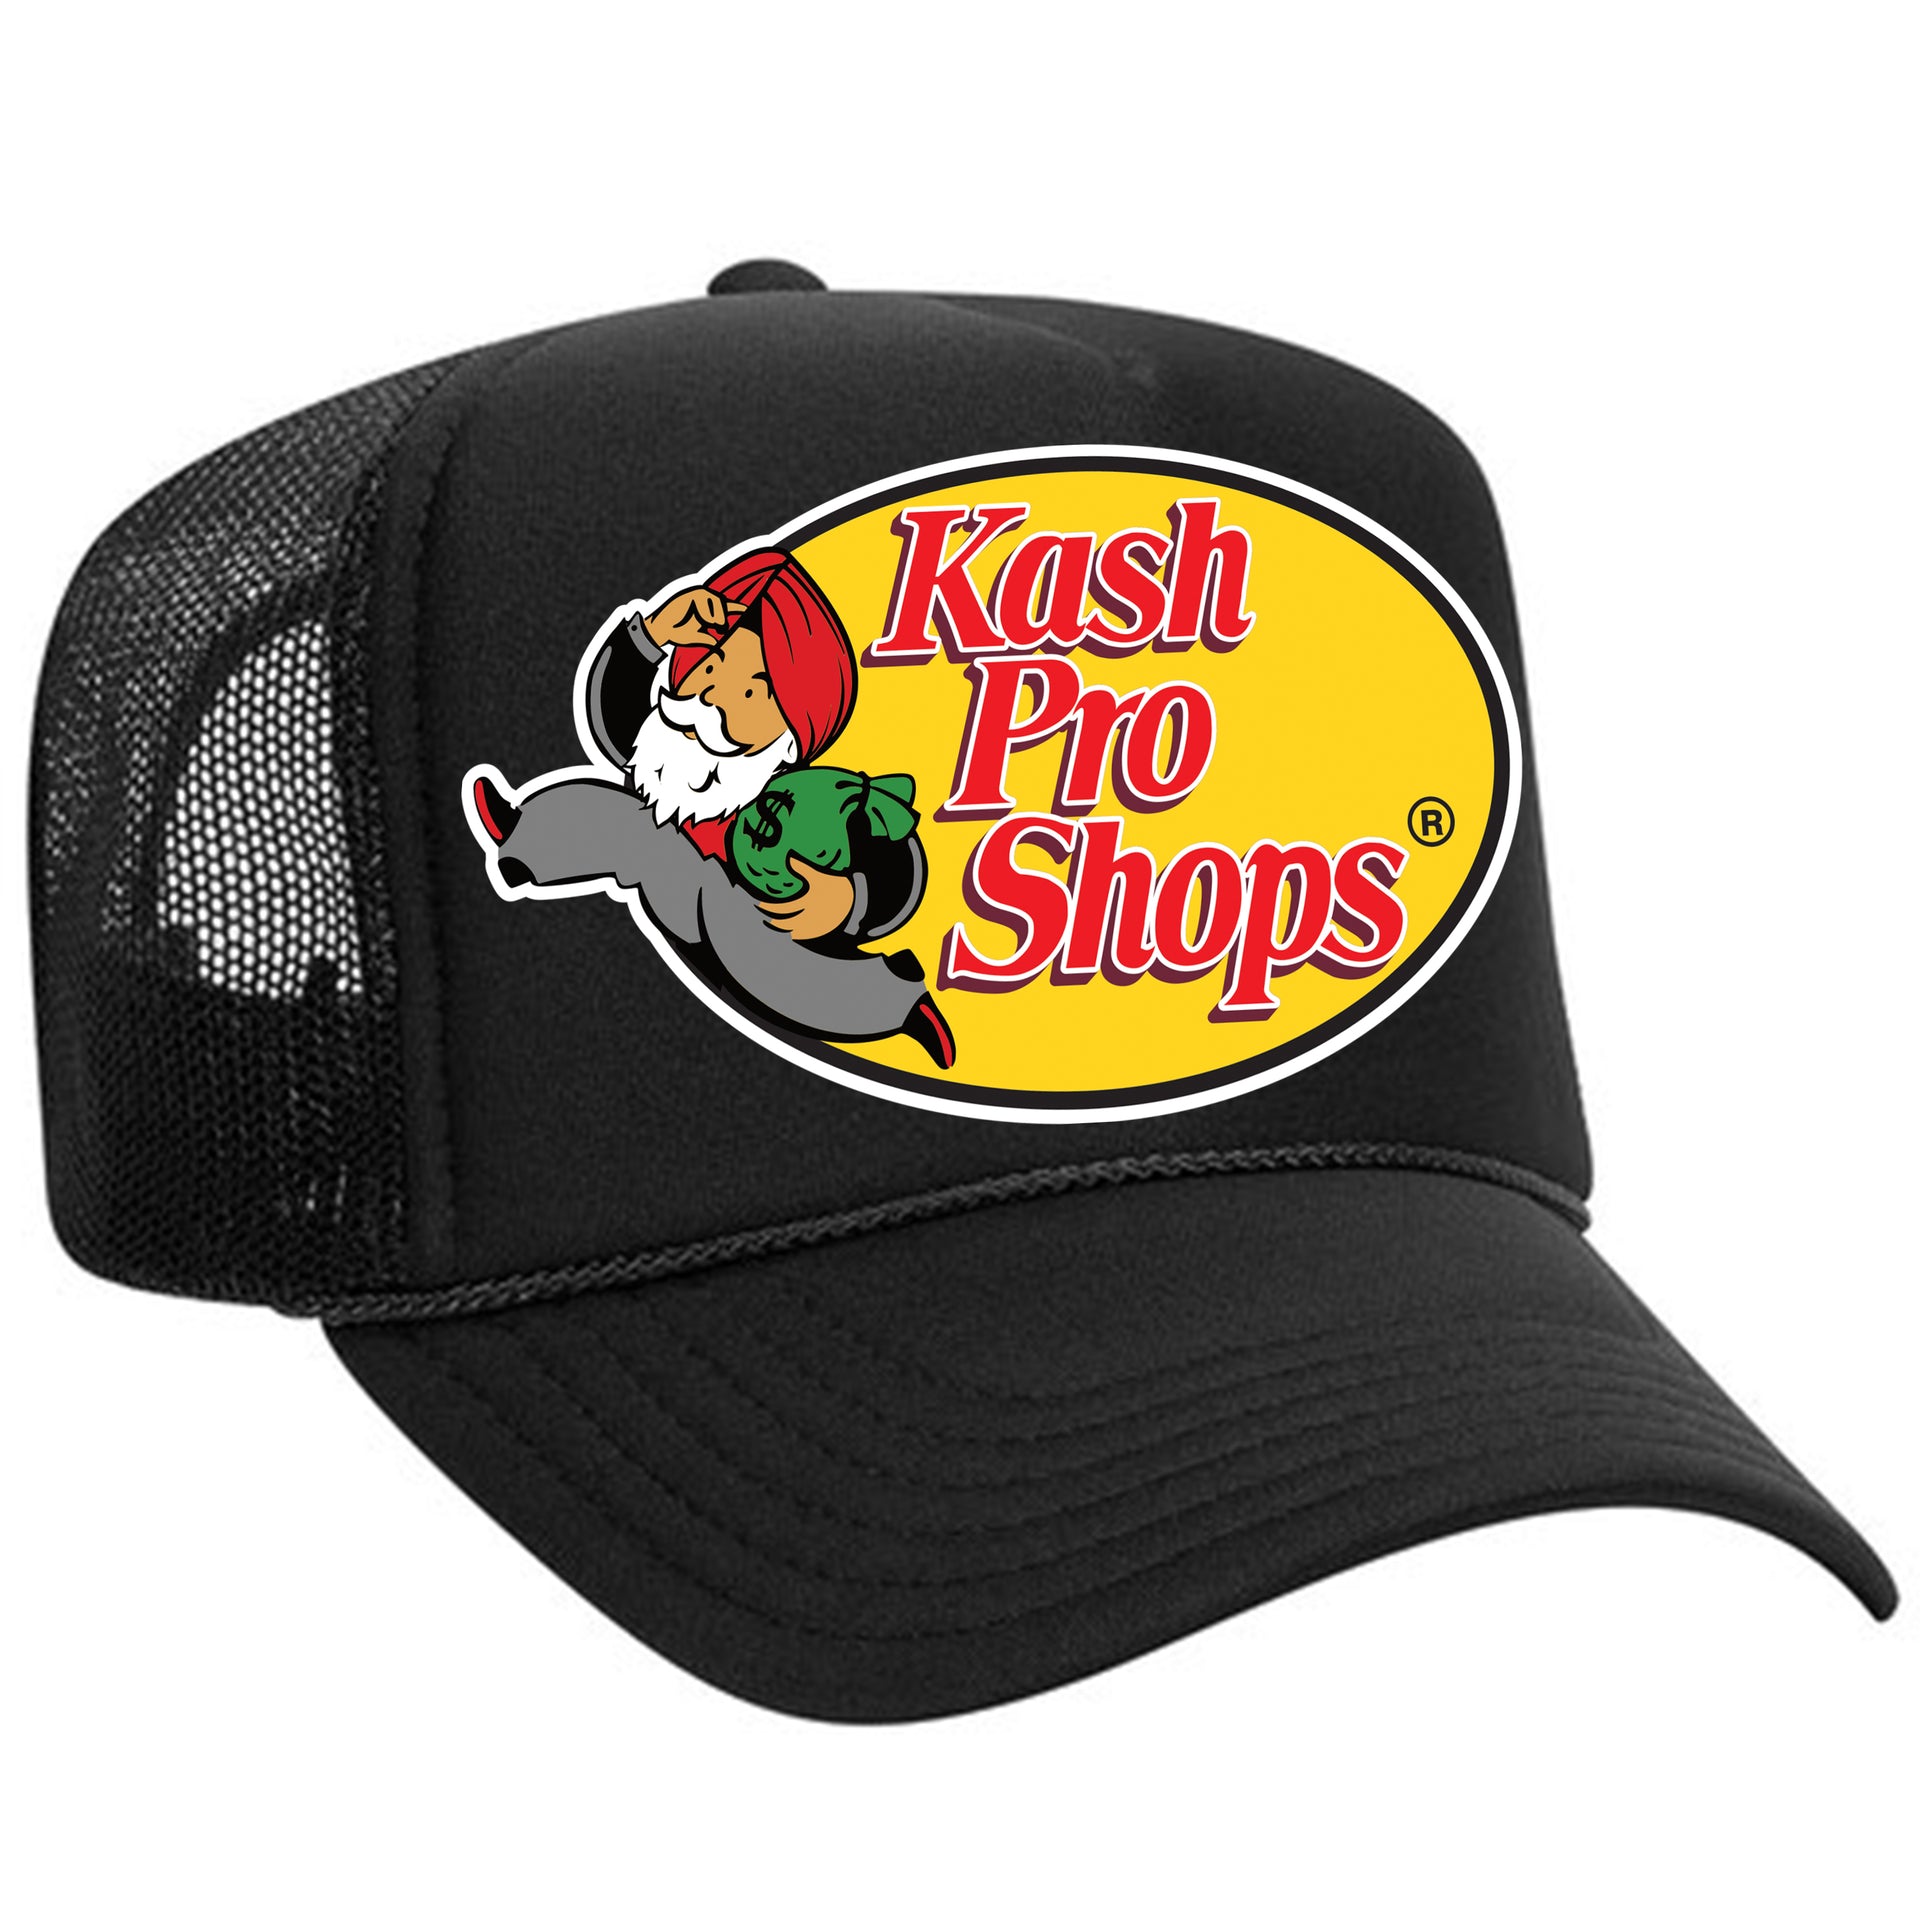  Cash Pro Shops Men's Trucker Hat Mesh Cap - Premium Low Crown -  One Size Fits All Snapback Closure - Great for Hunting & Fishing (Black) :  Sports & Outdoors